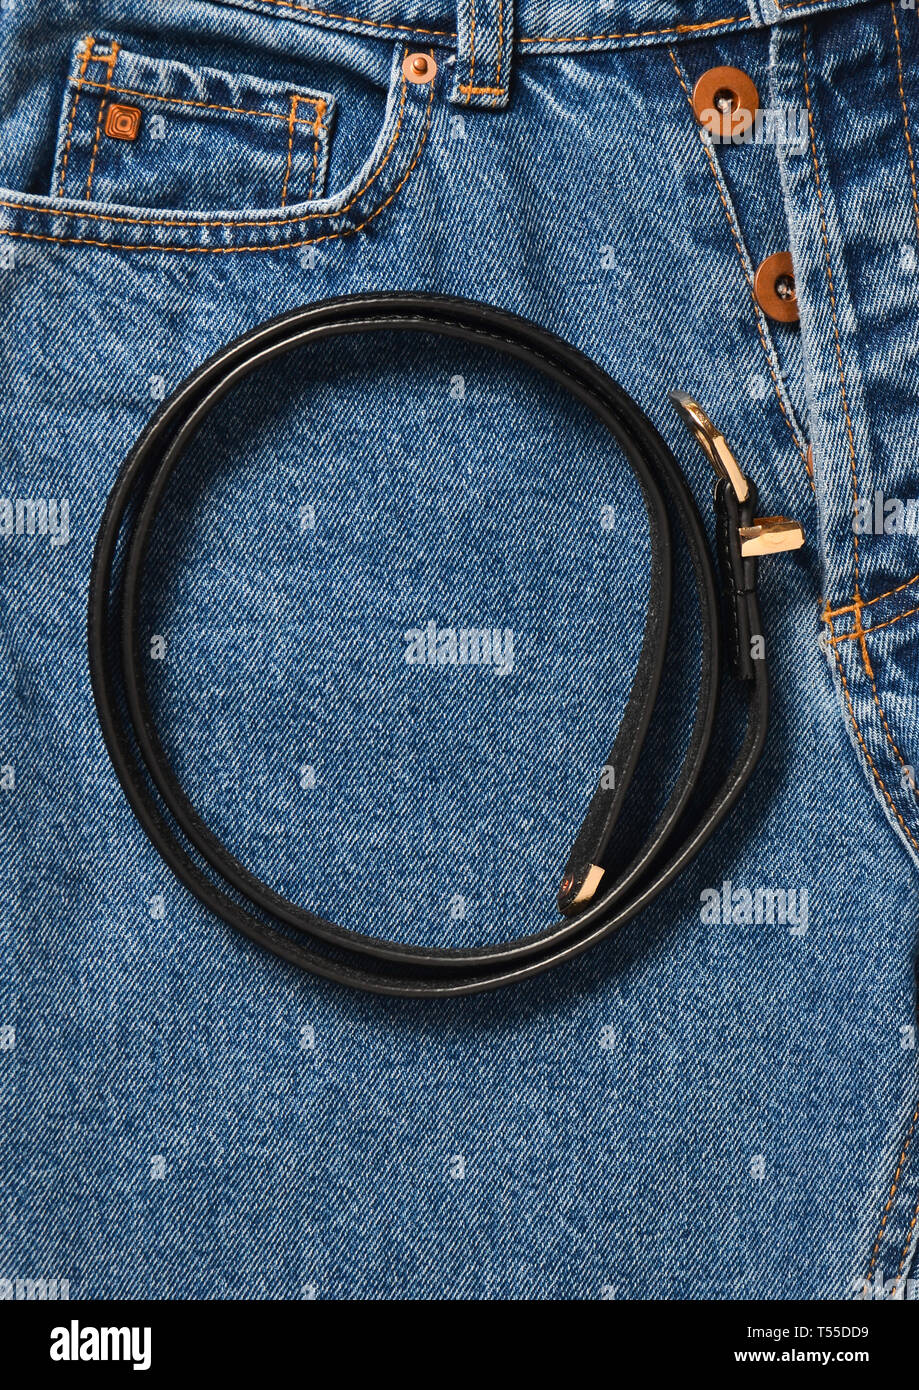 Black leather belt on jeans. Top view. Trend of minimalism Stock